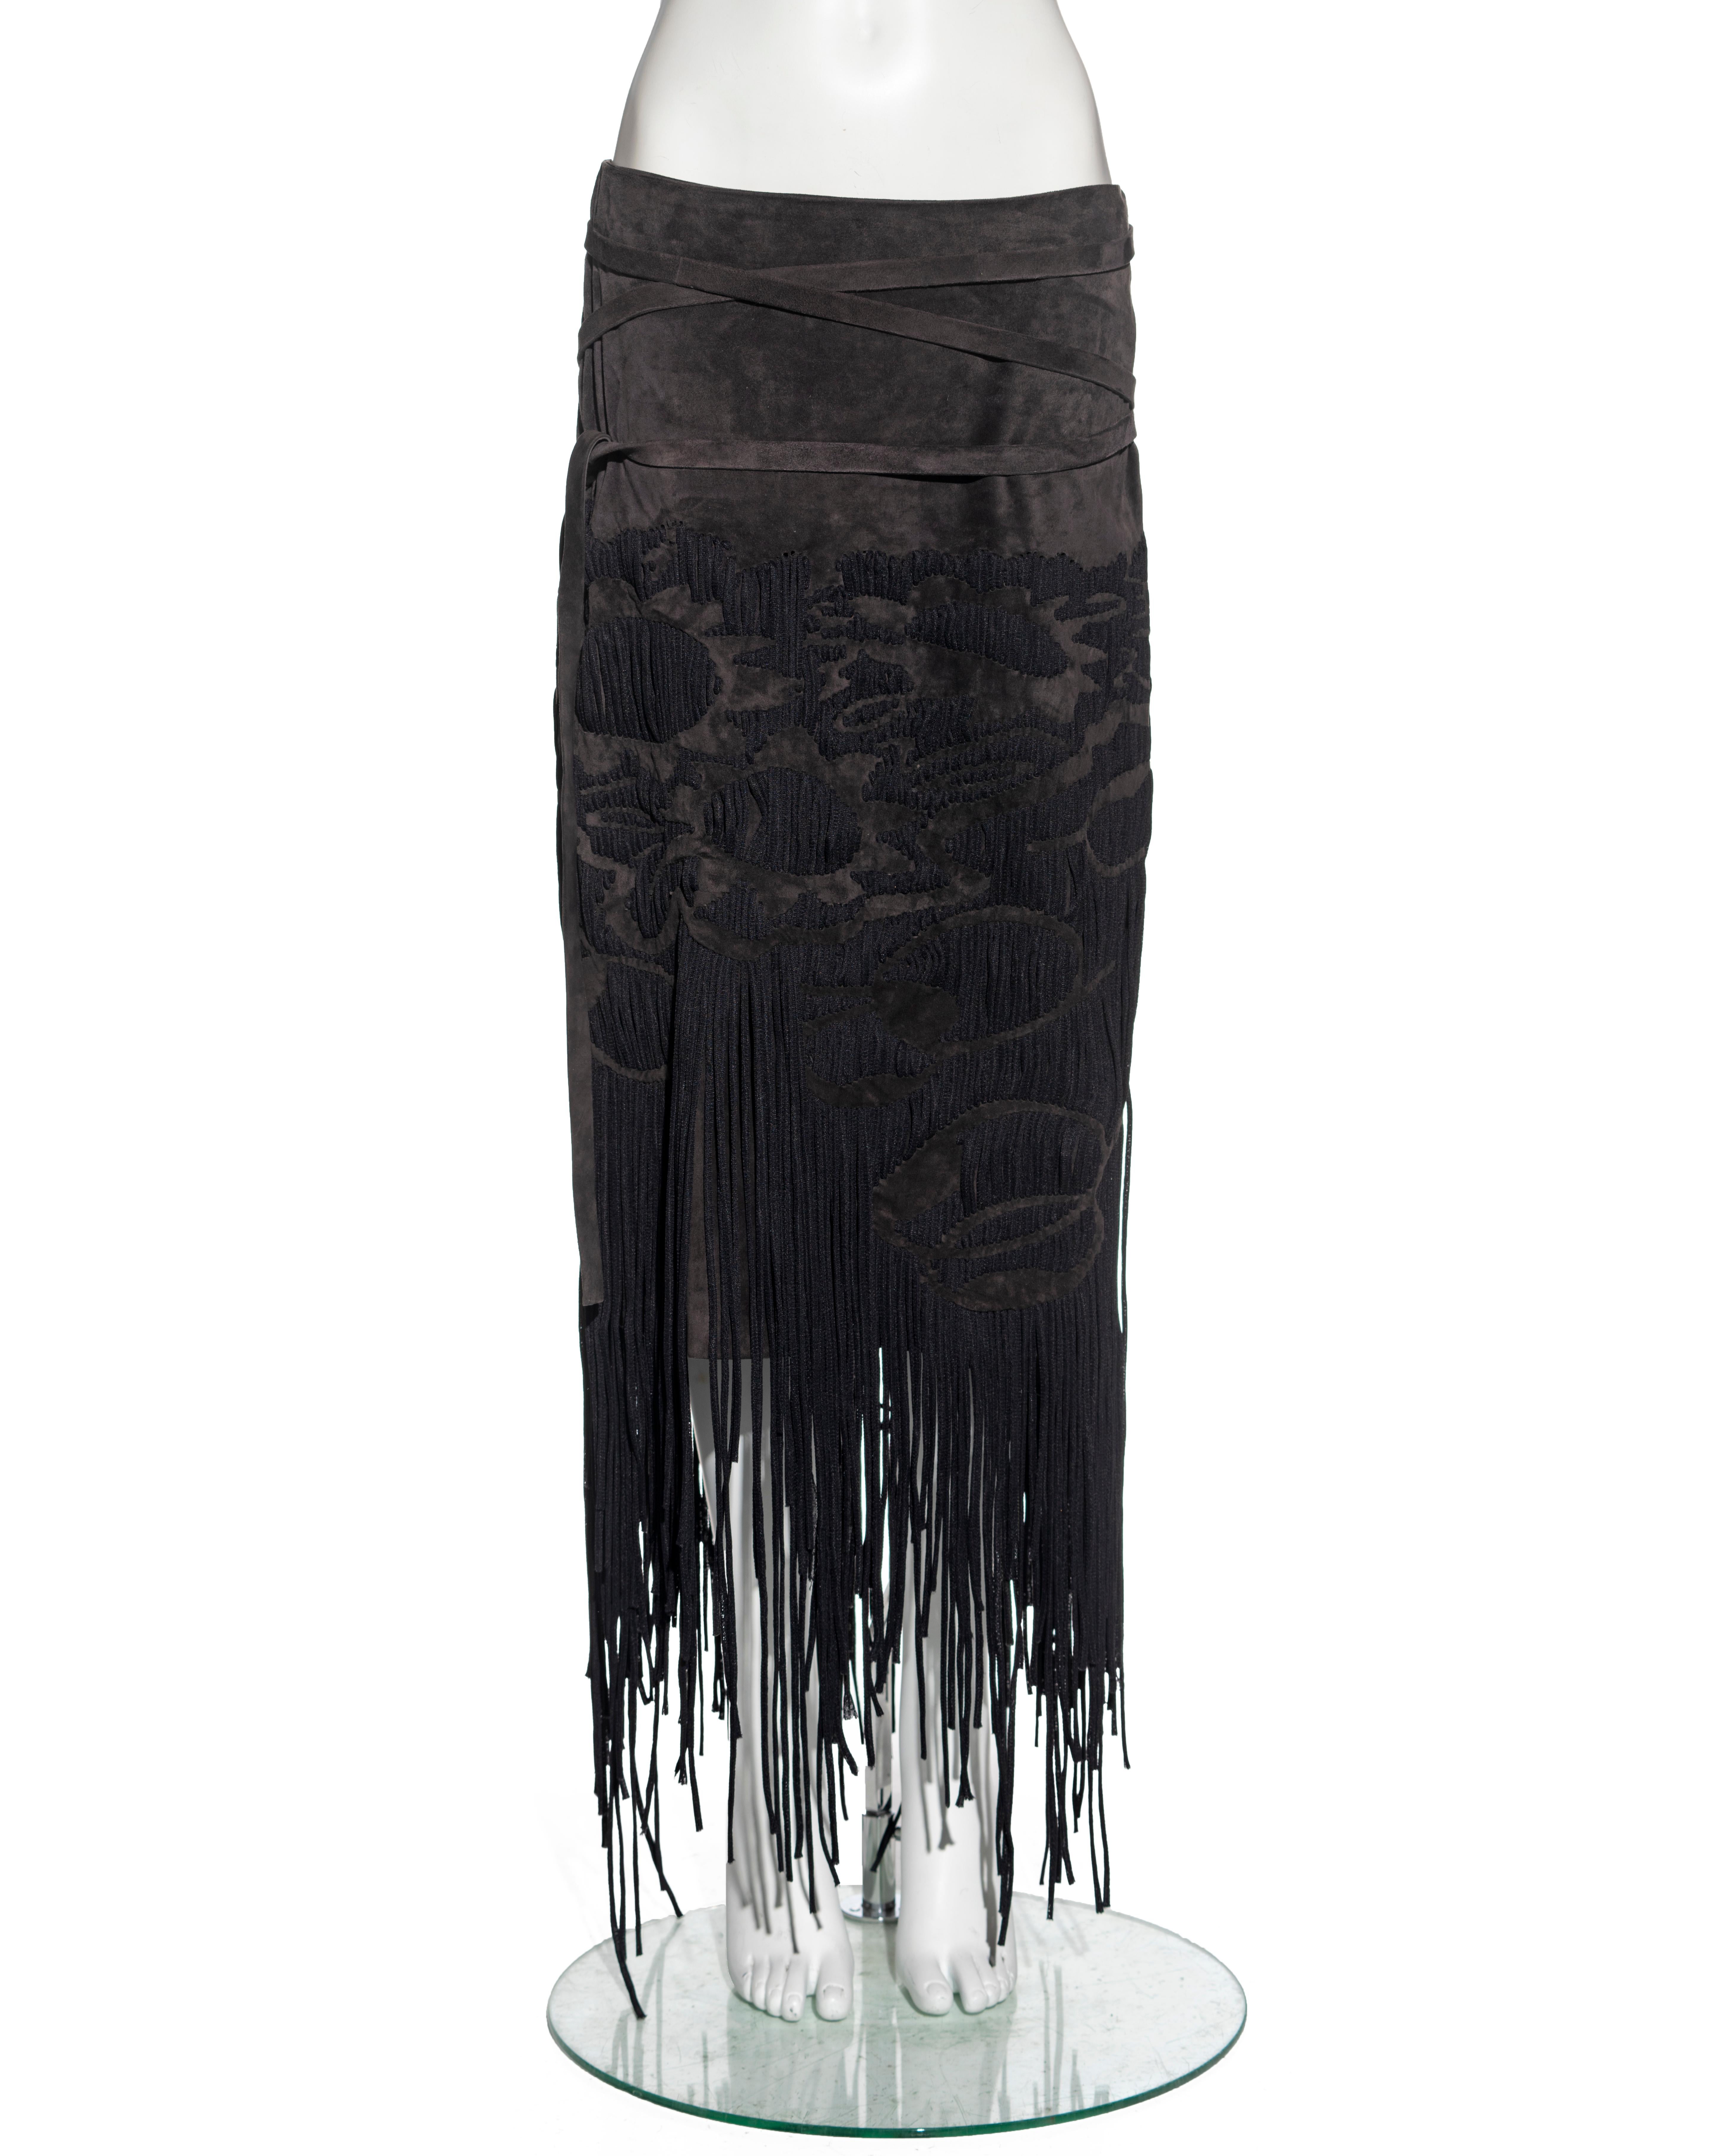 ▪ Yves Saint Laurent runway skirt
▪ Designed by Tom Ford 
▪ Constructed from dark brown suede 
▪ Abstract pattern made up with a multitude of woven laces  
▪ Long fringe trim 
▪ Attached belt  
▪ Silk lining 
▪ Fall-Winter 2001 
▪ FR 38 - UK 10 - US